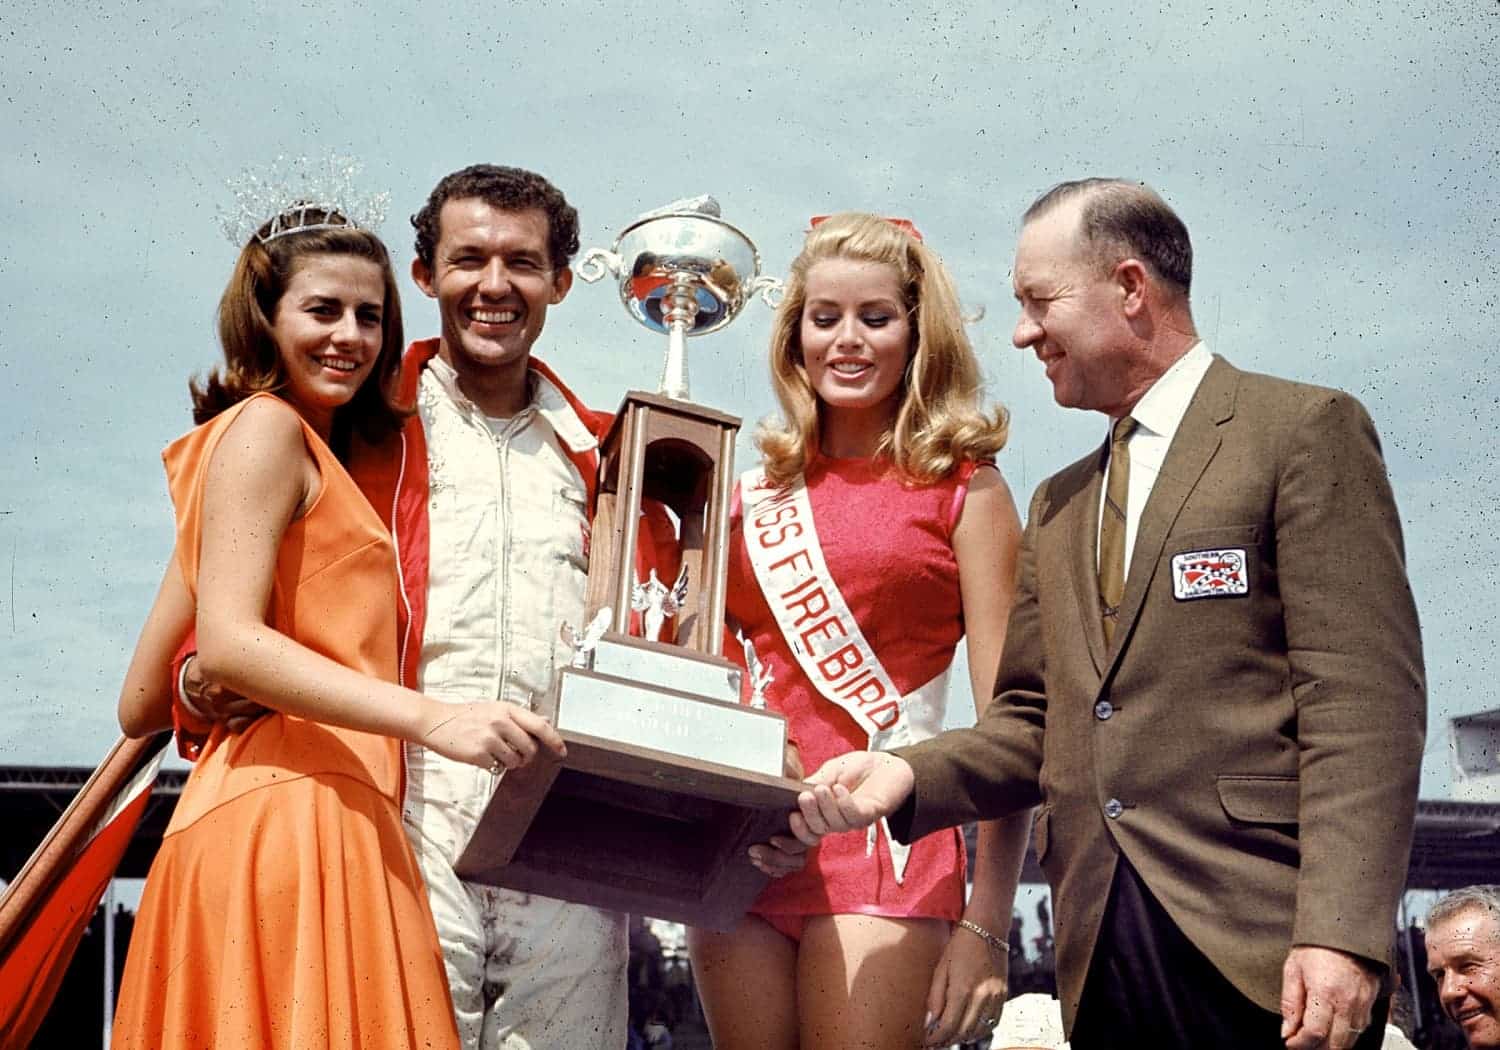 Richard Petty in Victory Lane after winning the 1967 Southern 500 NASCAR Cup race at Darlington Raceway. | ISC Images & Archives via Getty Images